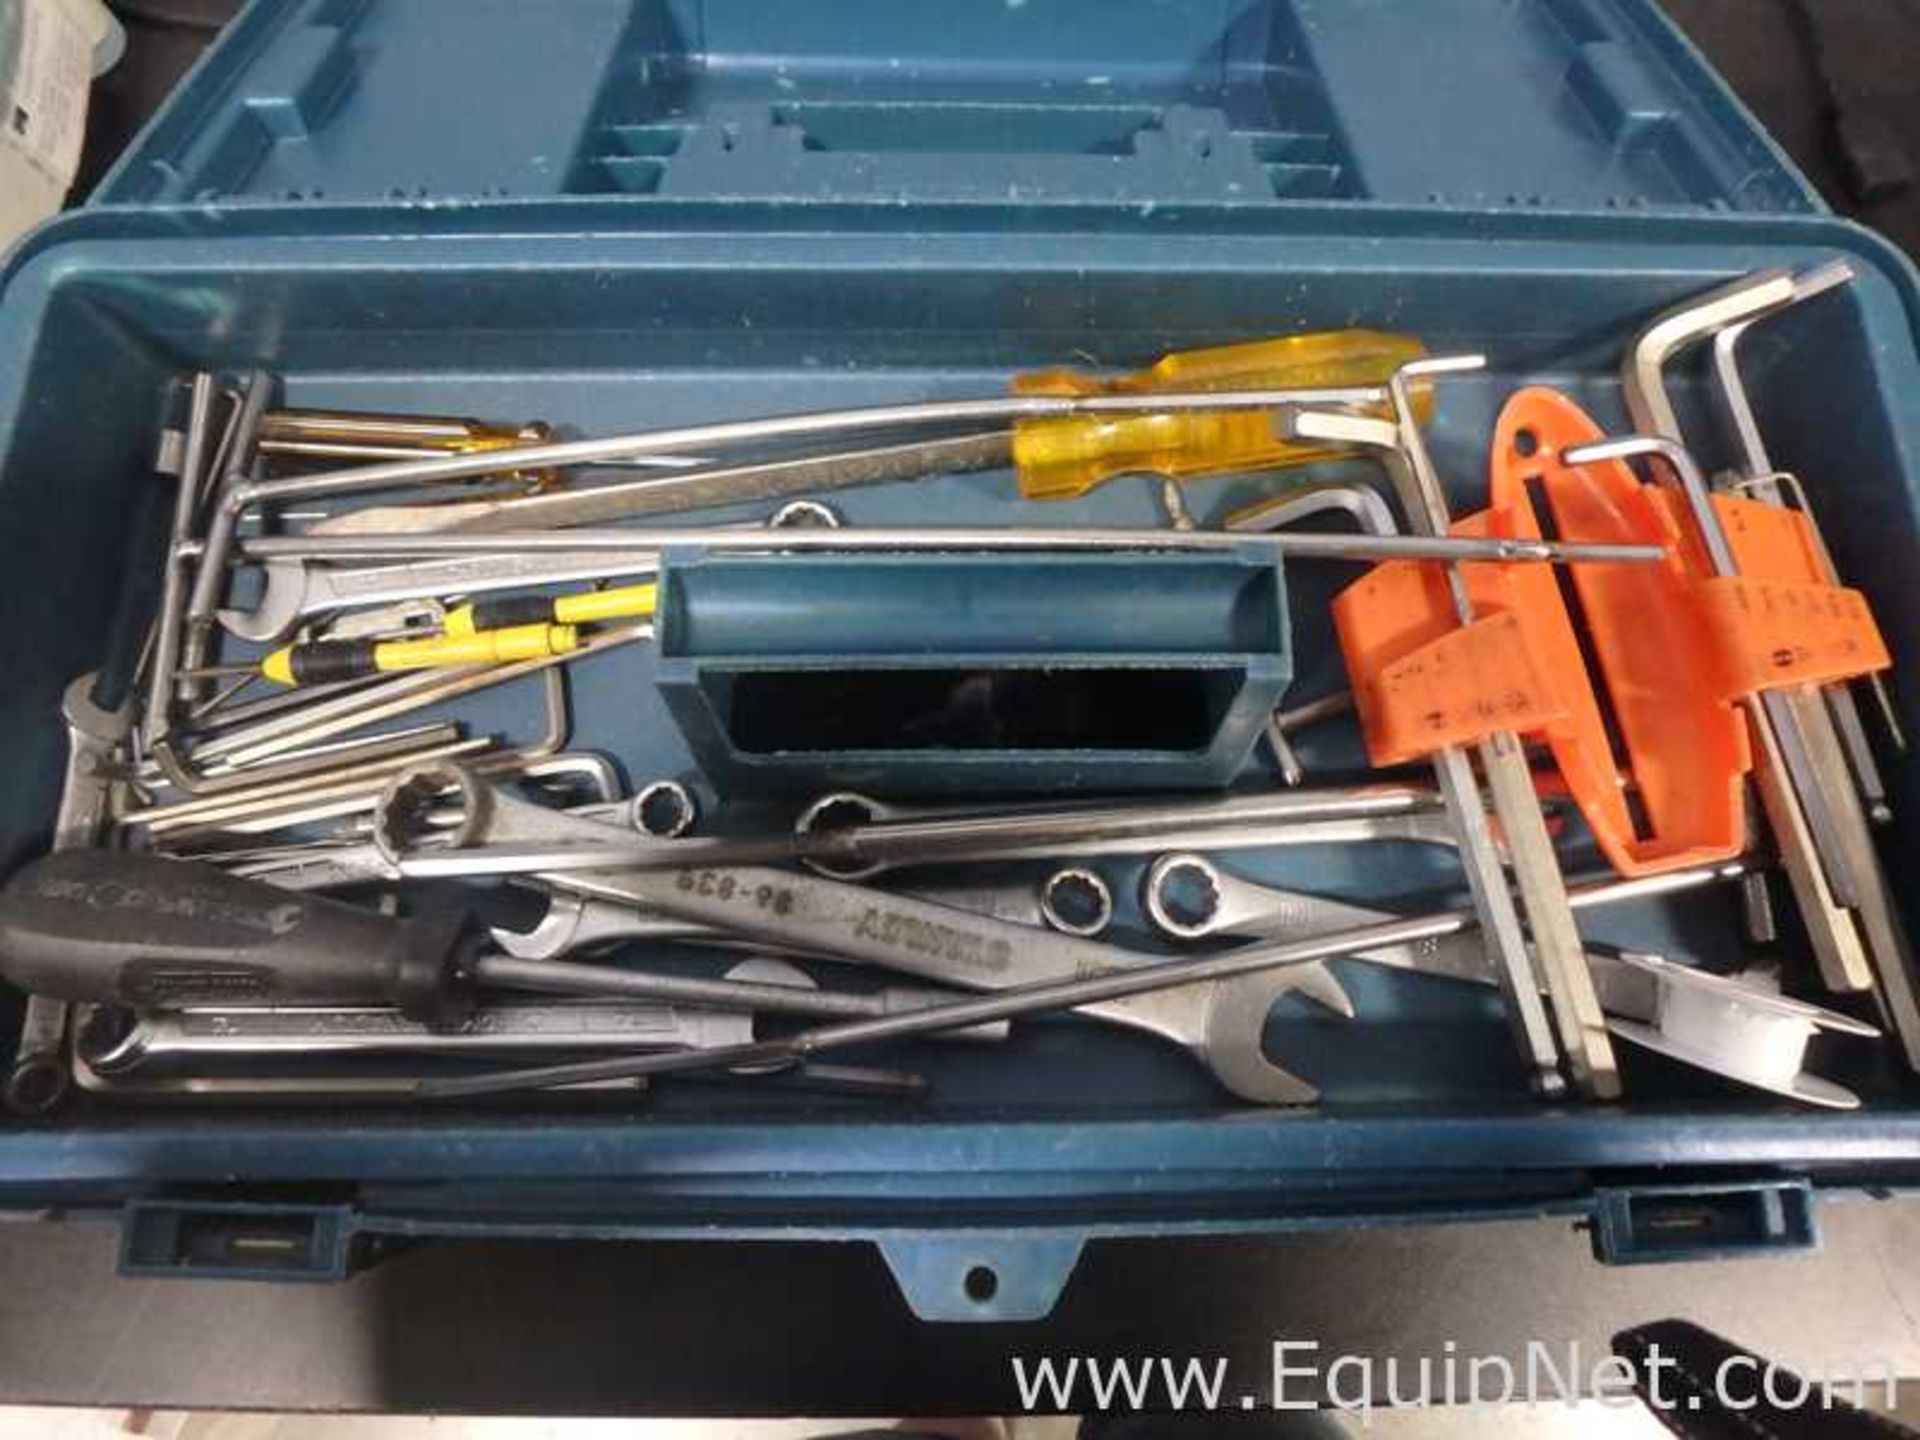 EQUIPNET LISTING #834506; REMOVAL COST: $10; DESCRIPTION: Tool Chests with Assorted ToolsSee - Image 4 of 5